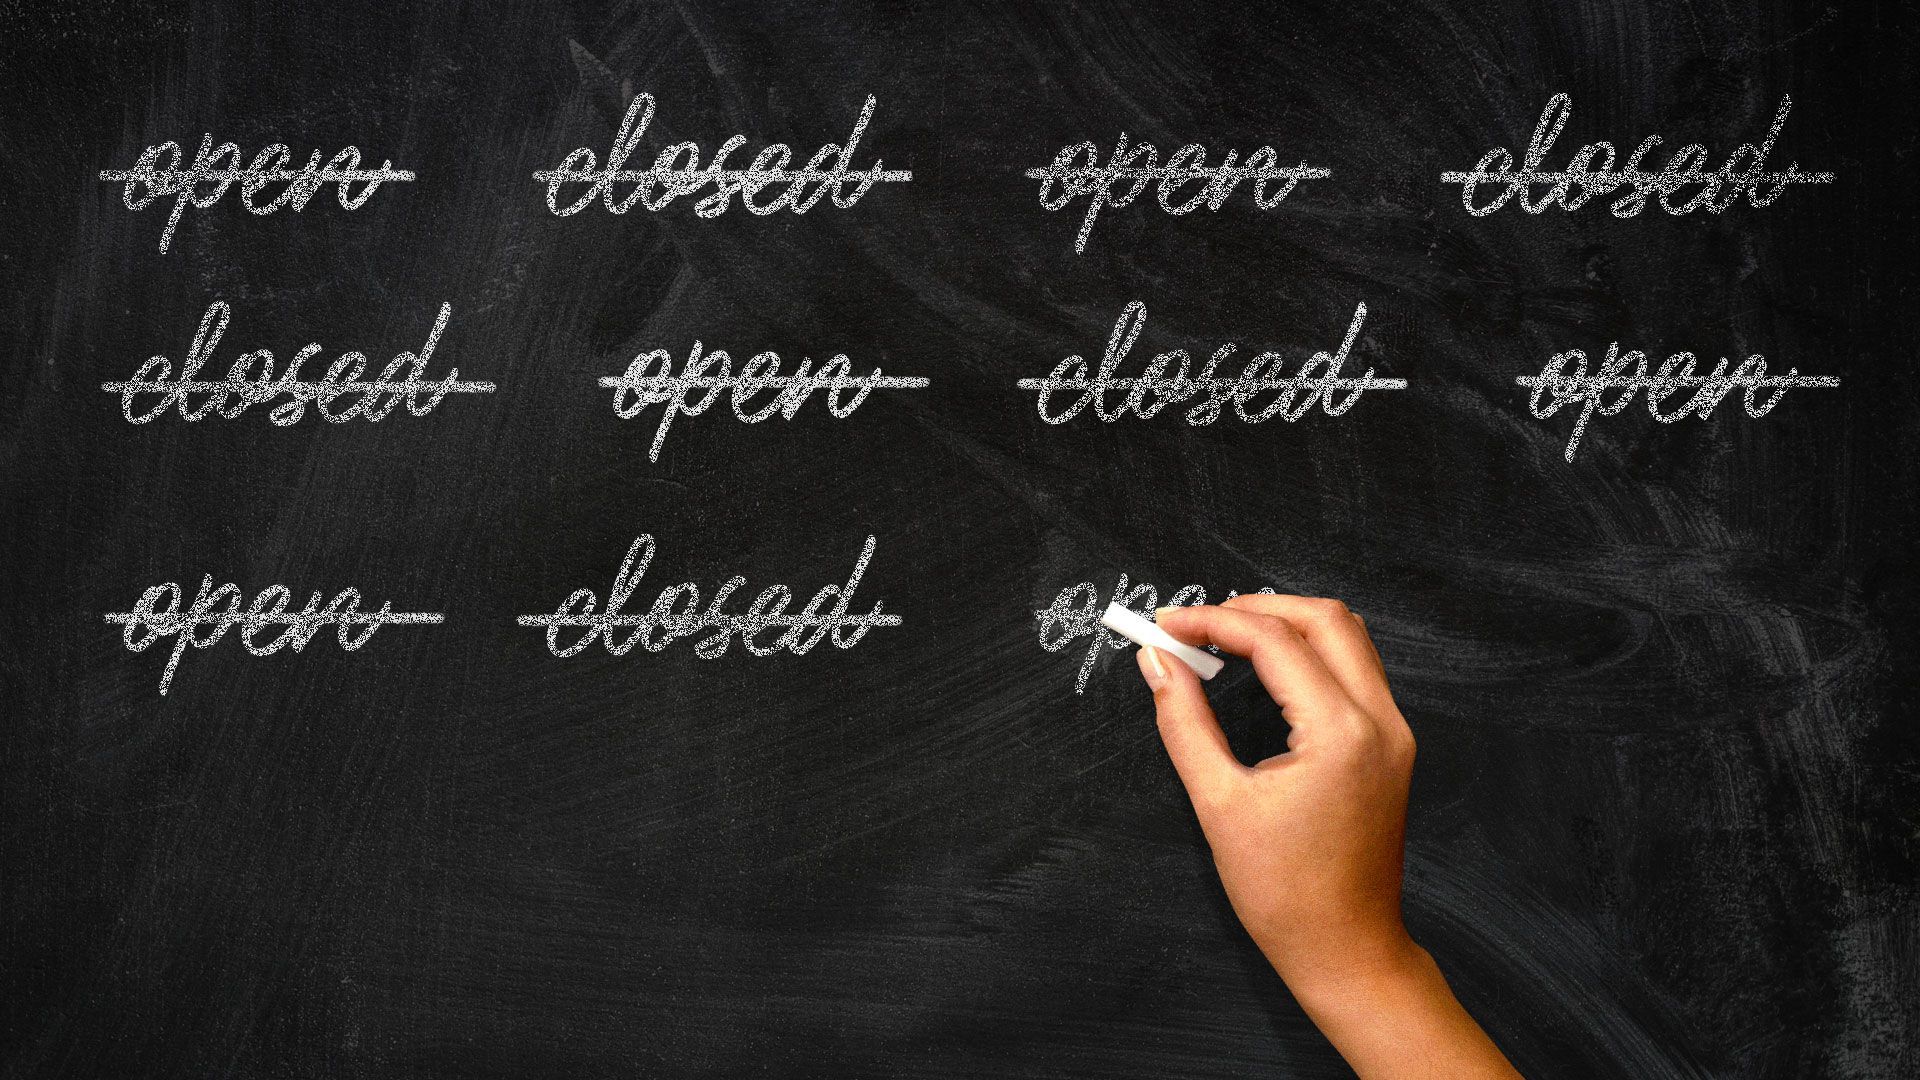 Illustration of hand writing and crossing out open and closed on a chalkboard